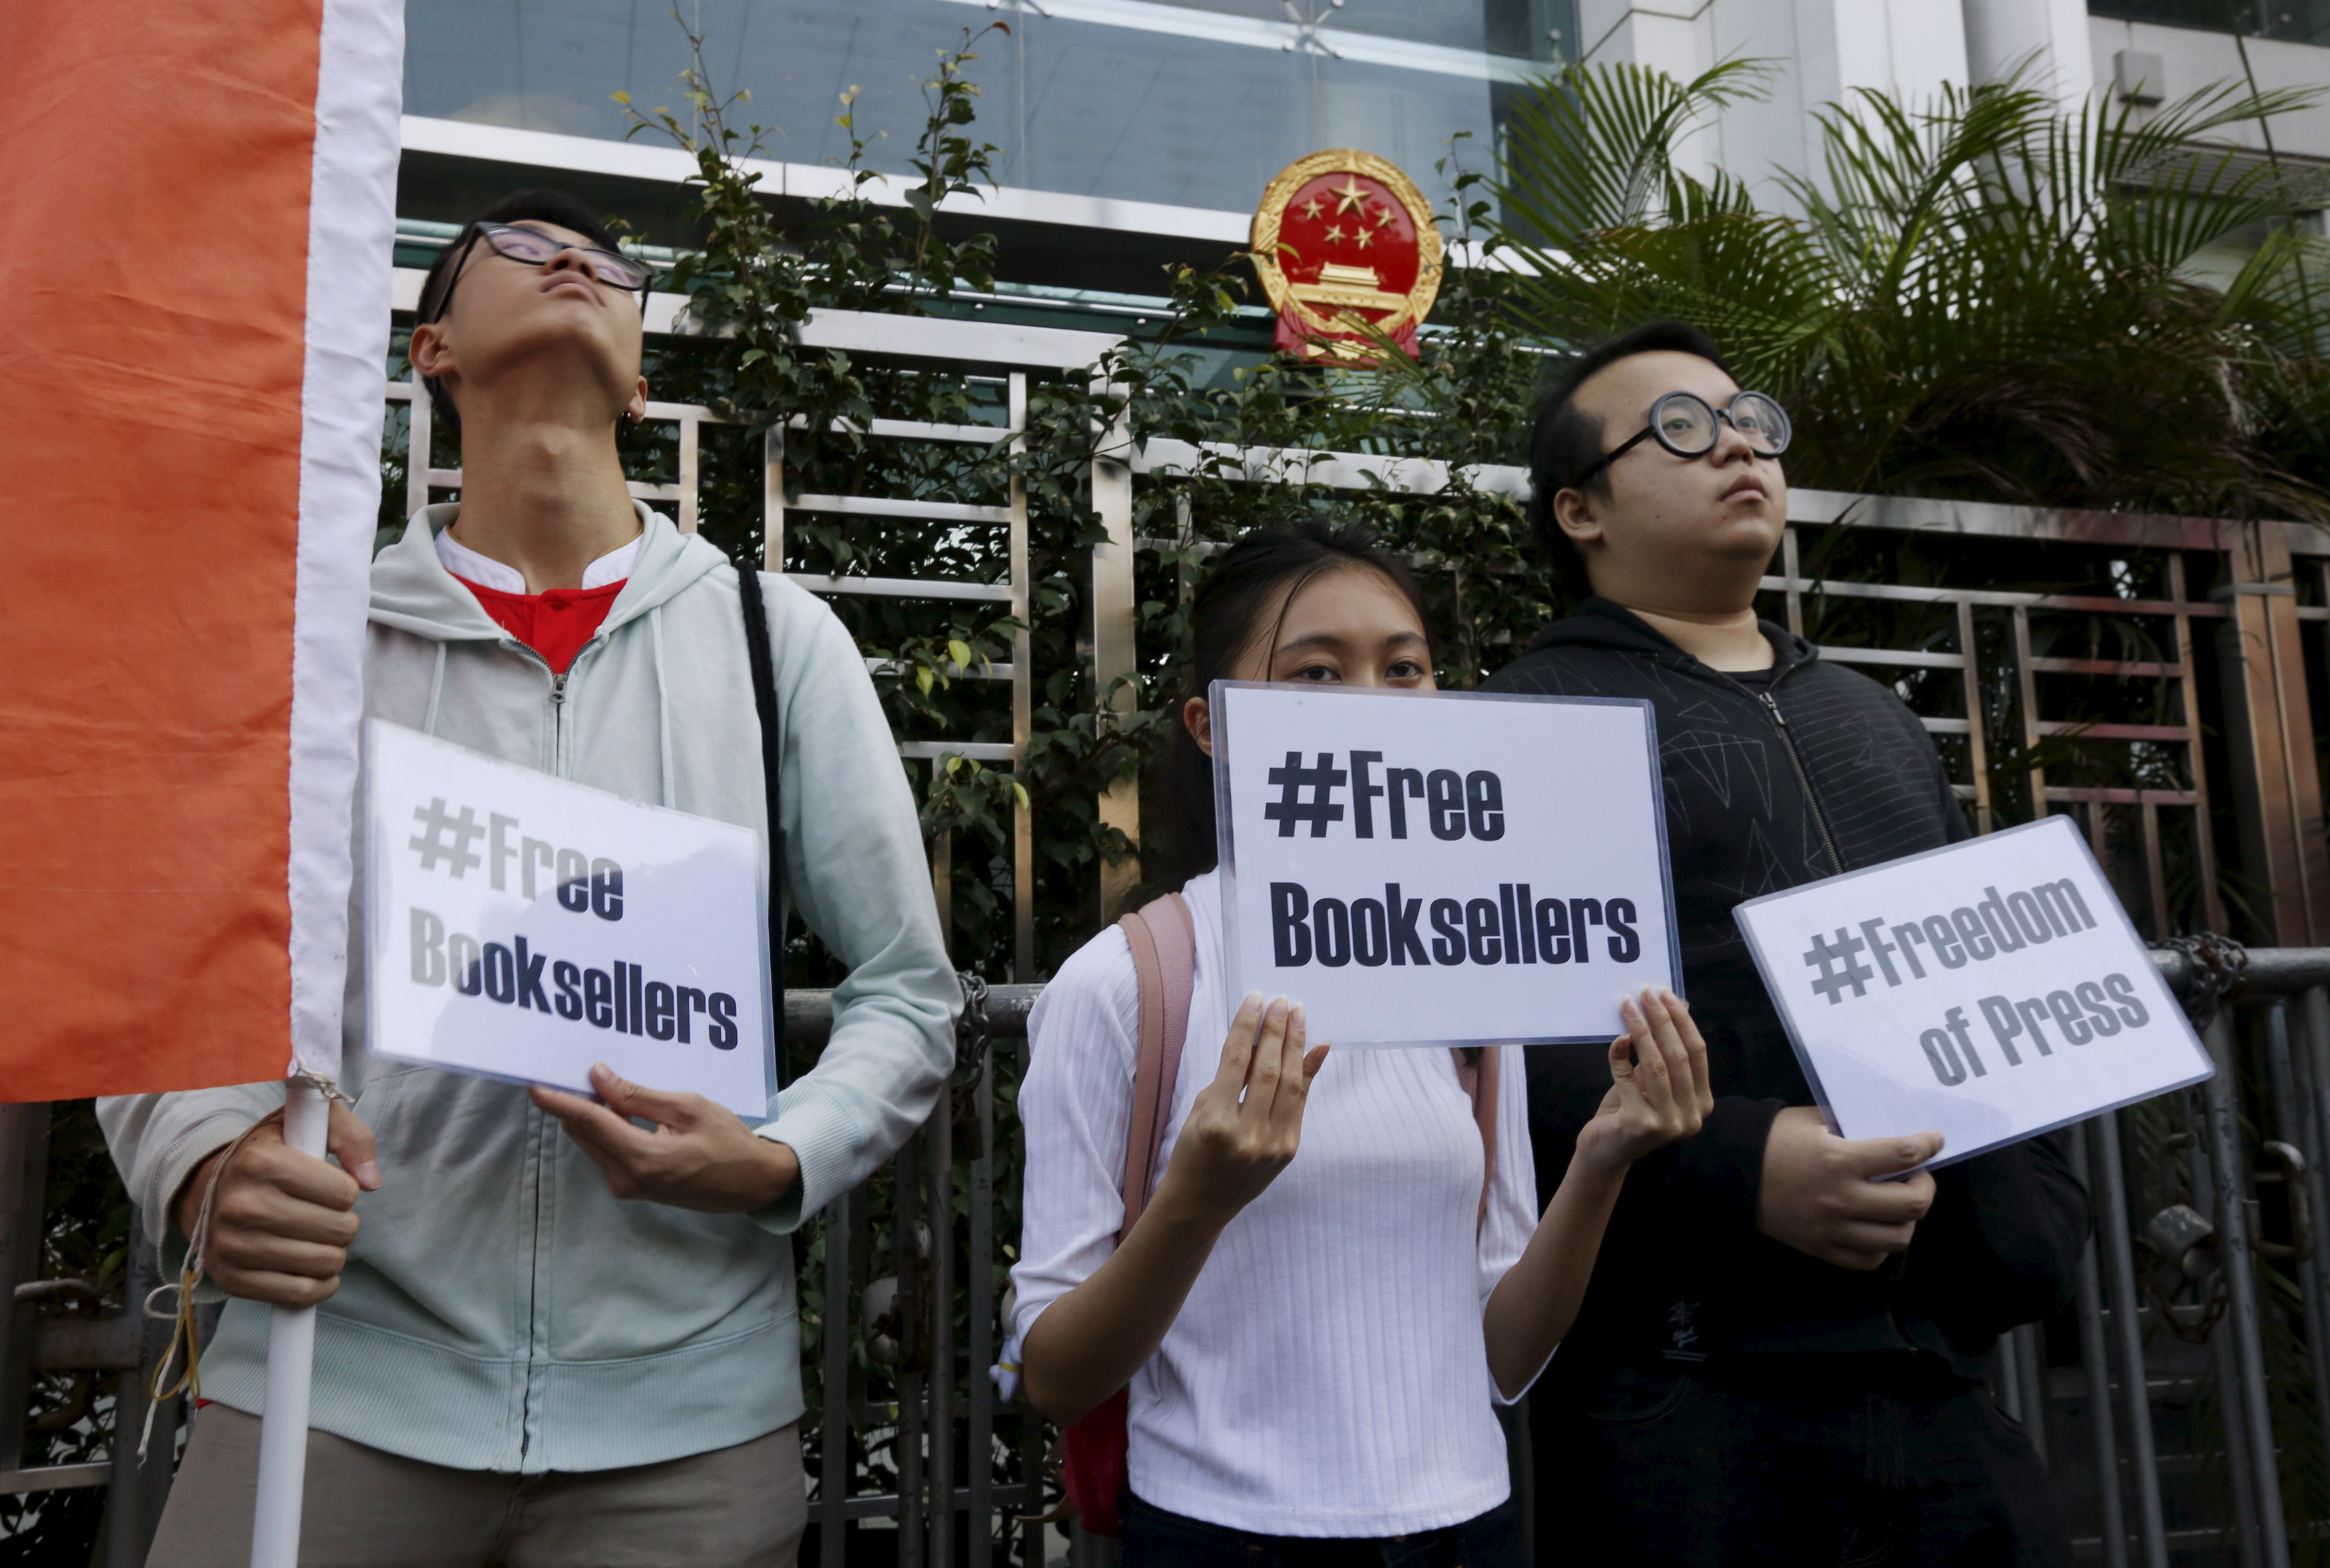 Members of student group Scholarism hold up placards during a protest about the disappearances of booksellers outside China's liaison office in Hong Kong, China